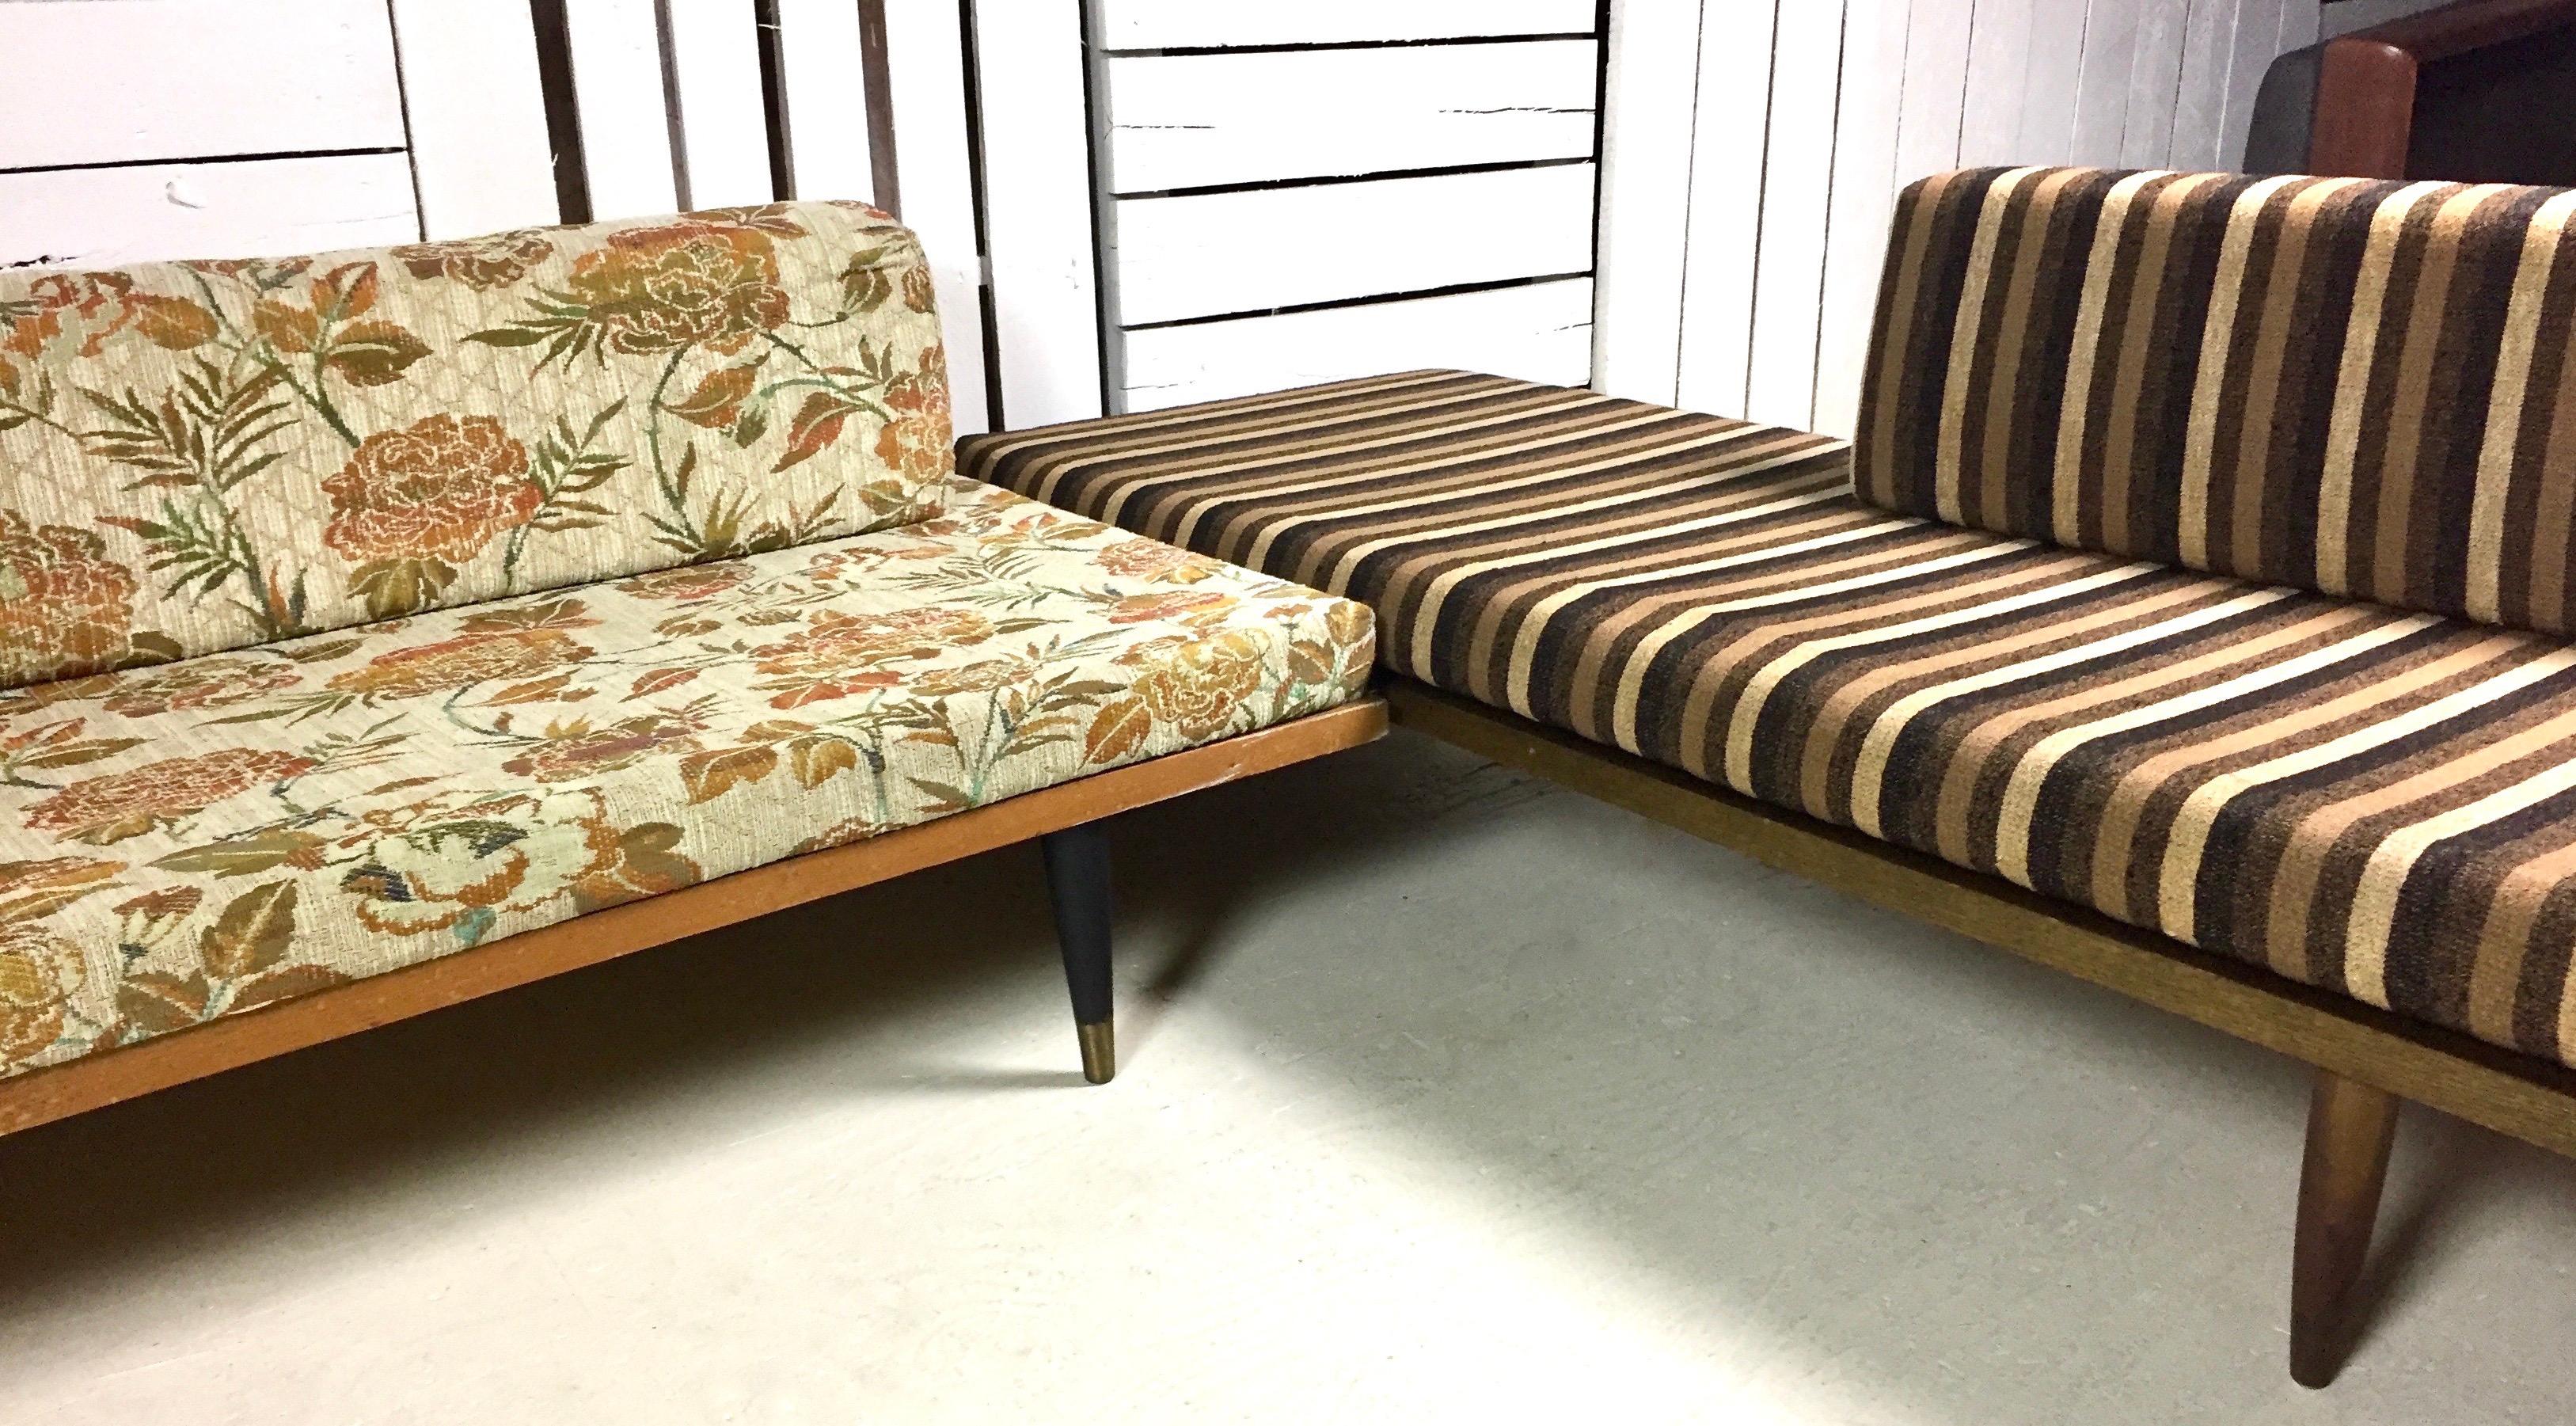 Adrian Pearsall two-piece sectional sofa by Craft Associates, circa 1960s. The left portion has a non-original red, orange and green floral print and the right side has the original two-tone brown and cream striped cotton upholstery. The left daybed